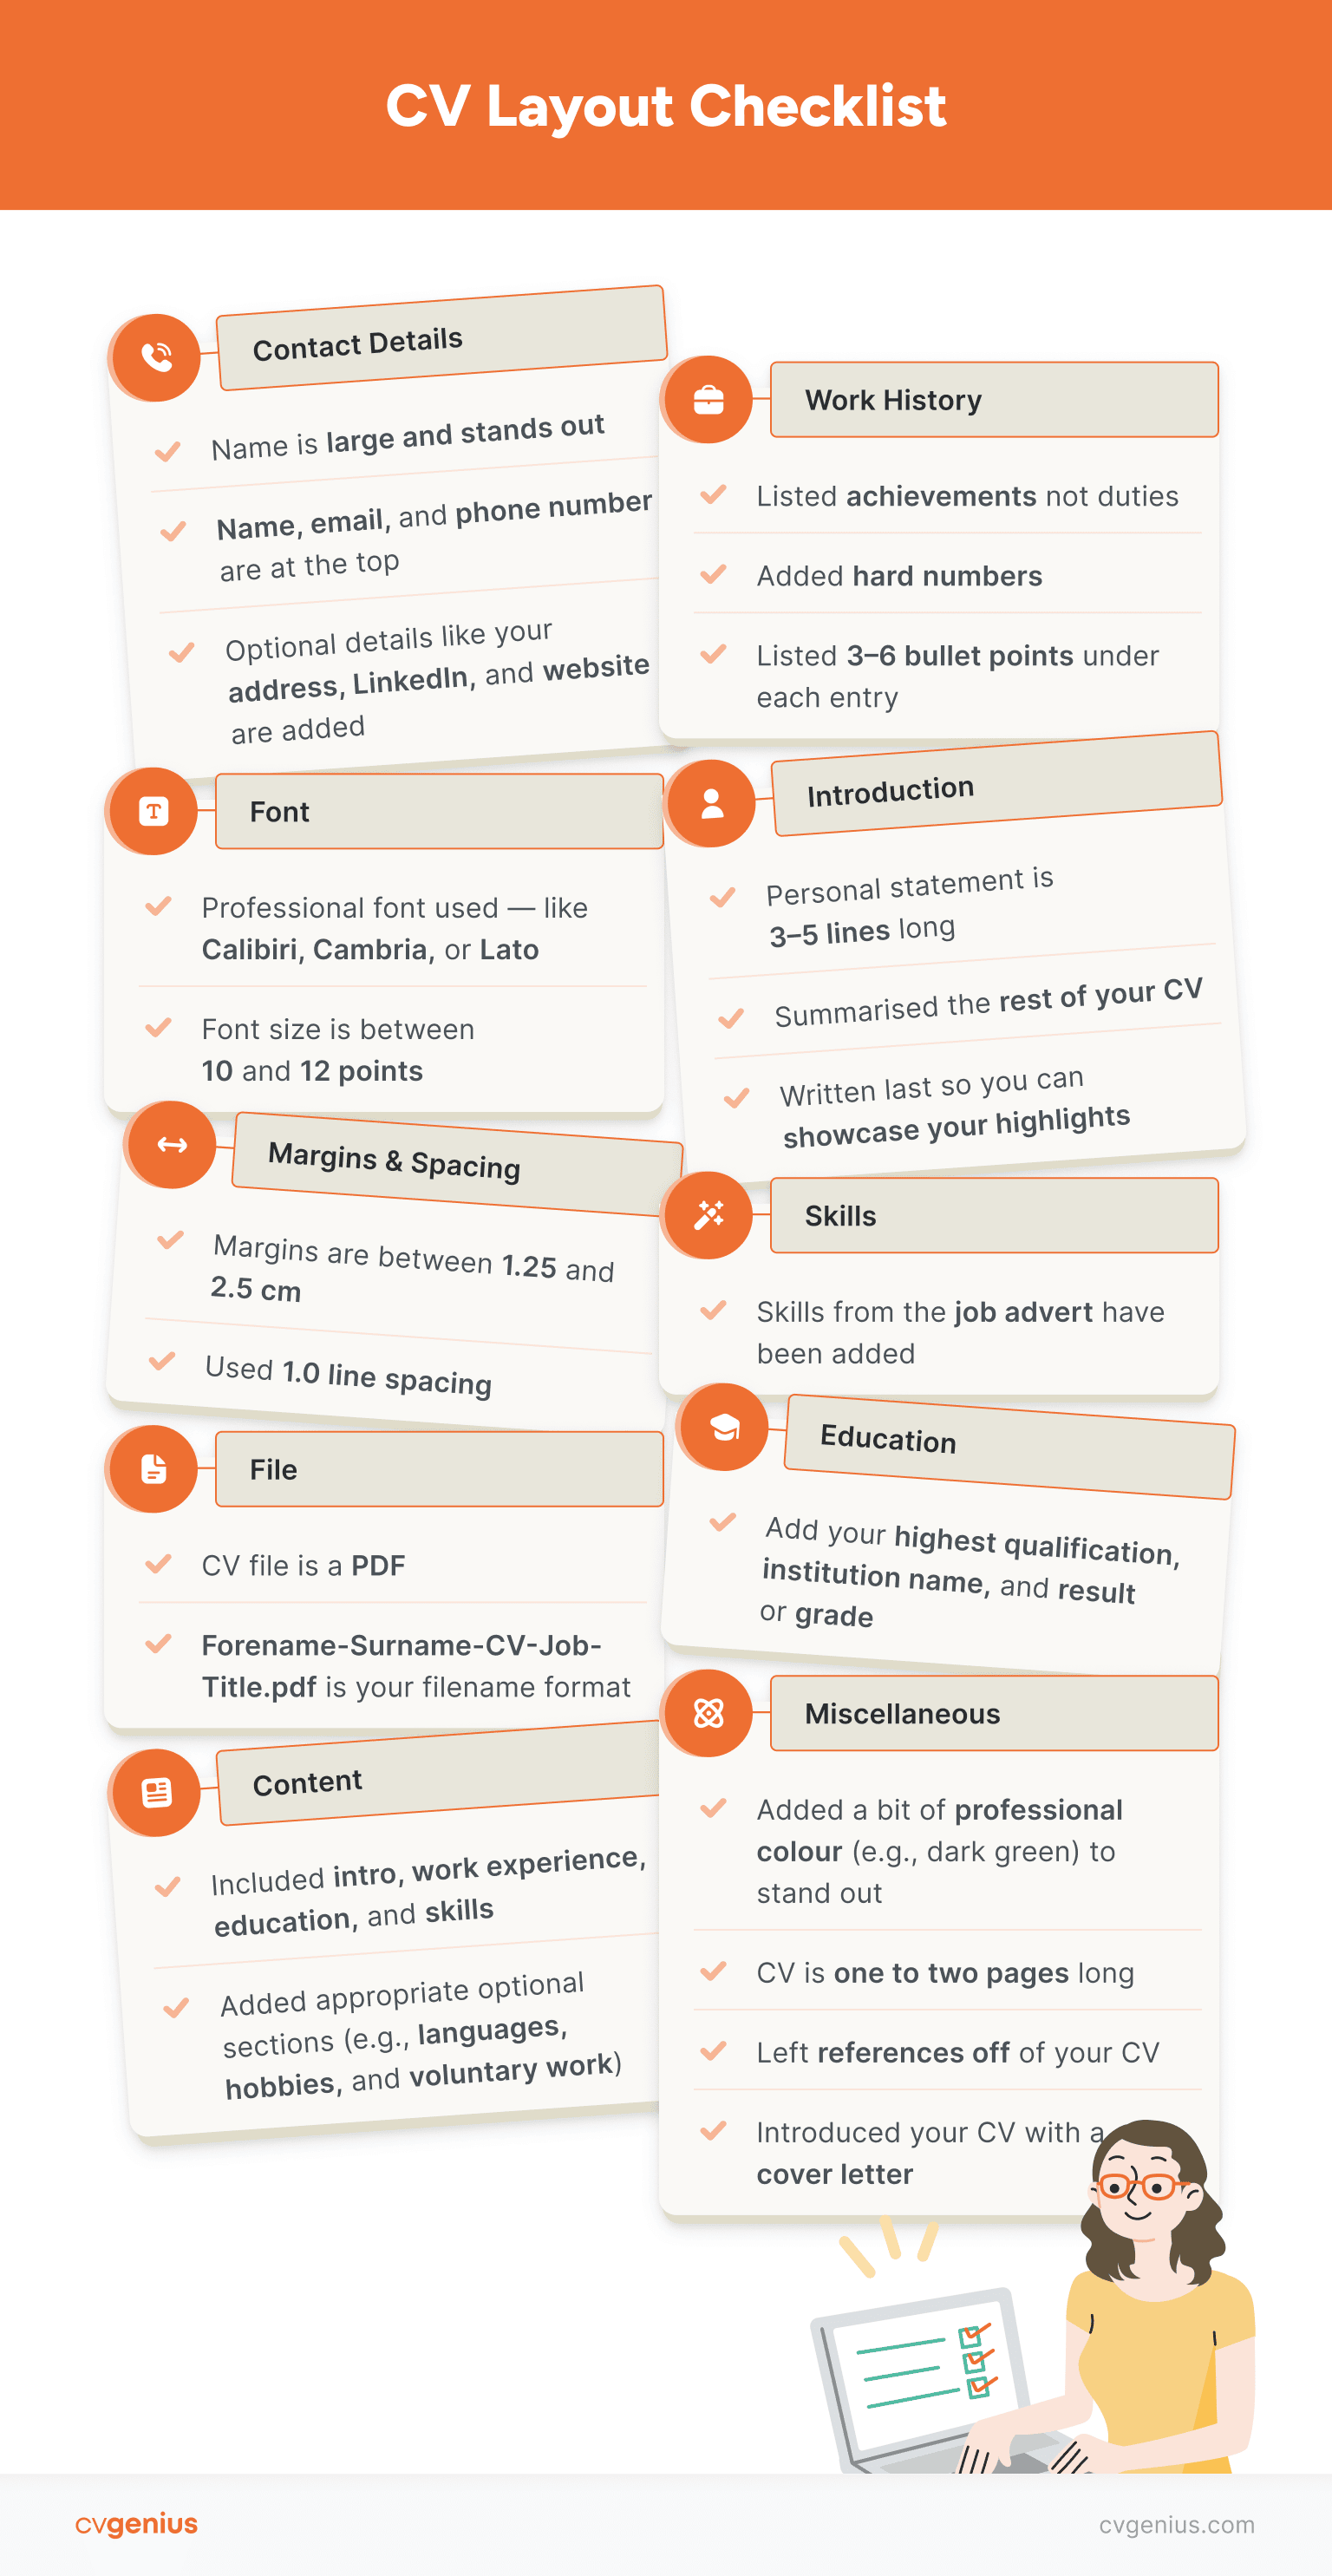 A CV layout checklist which guides users through double-checking how they've presented their CVs